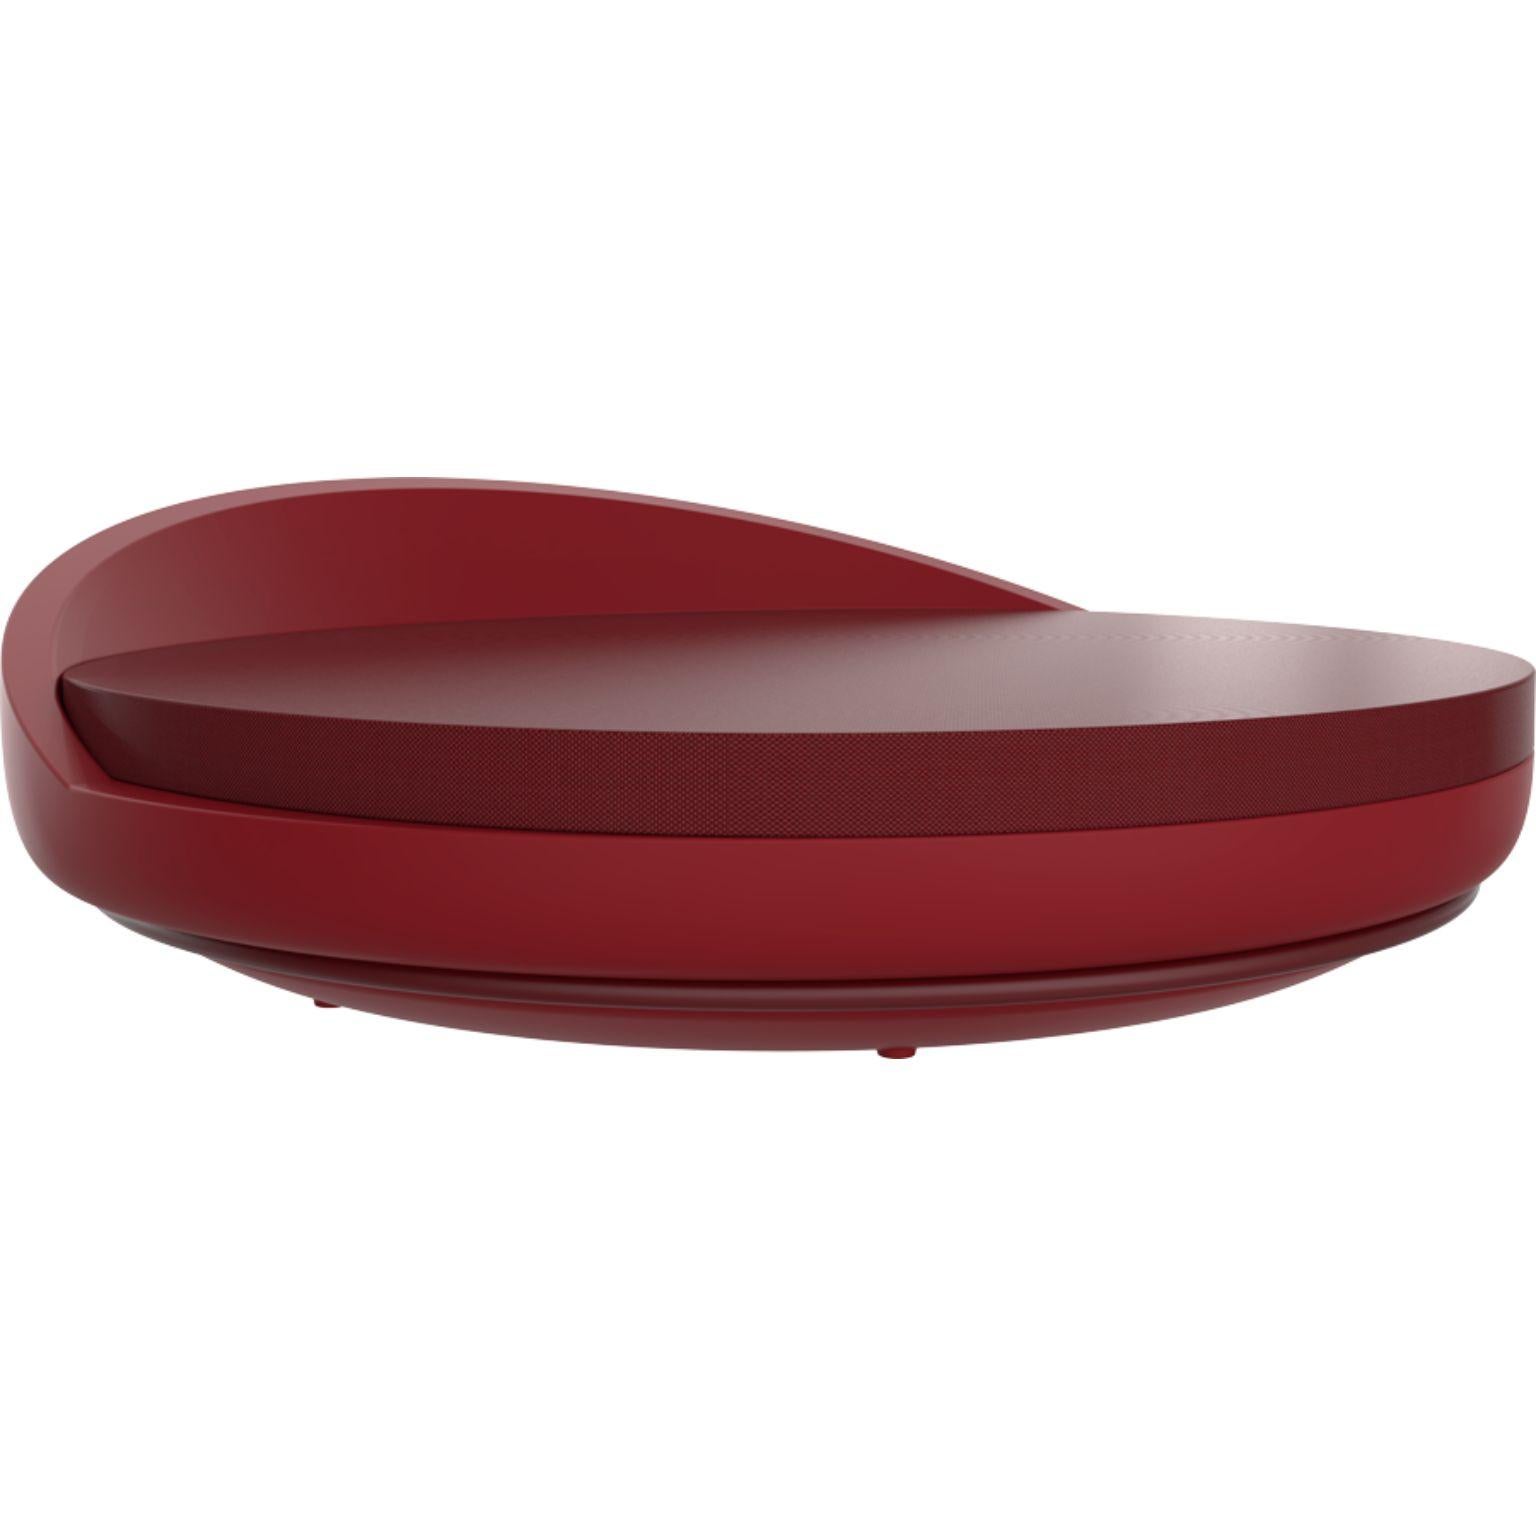 Lace burgundy daybed by MOWEE
Dimensions: D200 x W195 x H60 cm.
Material: Polyethylene, stainless steel and polyester.
Weight: 60 kg
Also available in different colors and finishes (lacquered). Optional wheel kit. 

Lace is a collection of